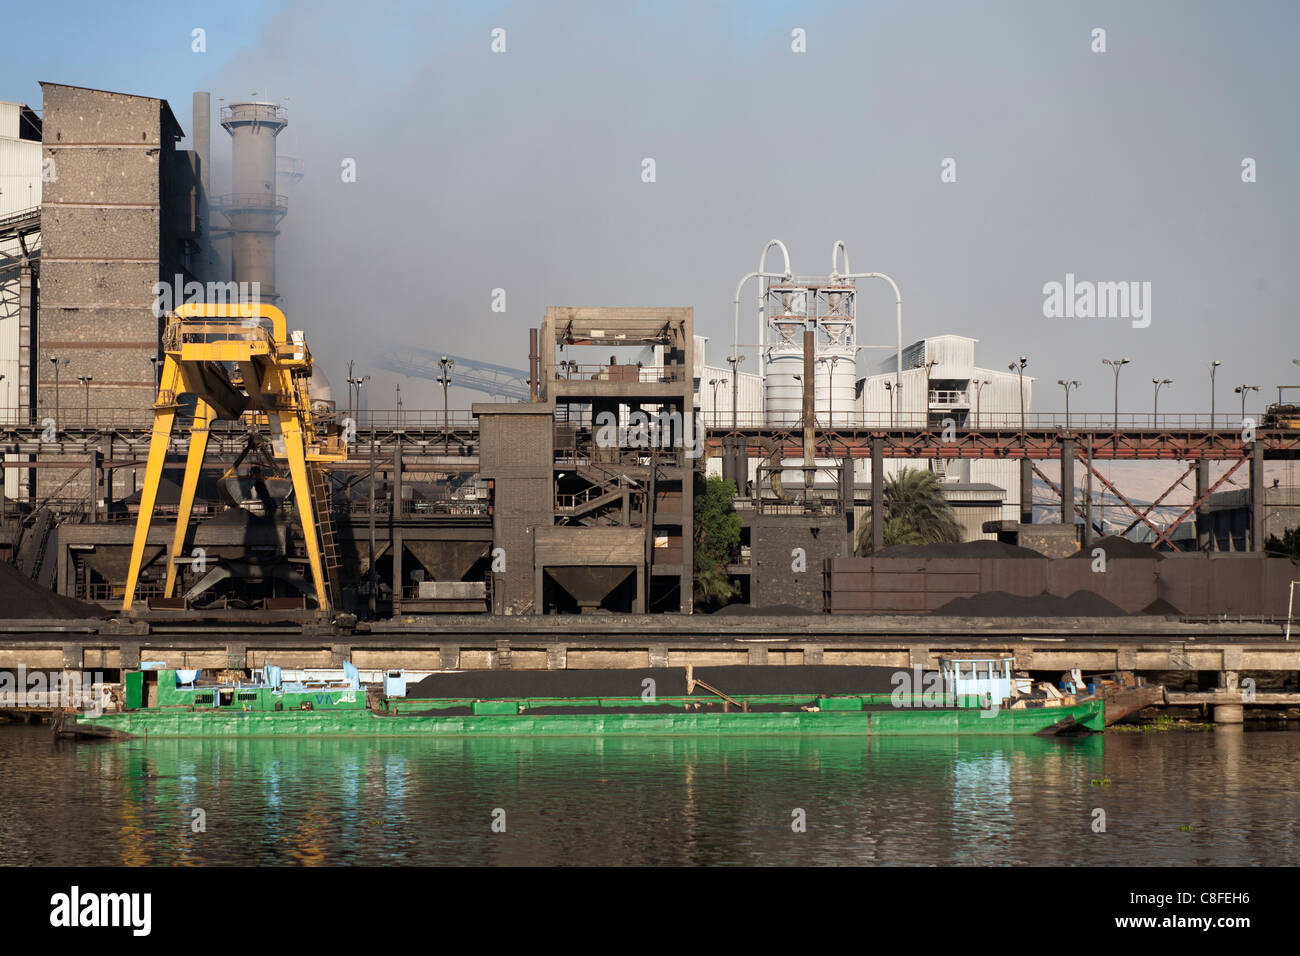 A section of Nile river bank with industrial plant belching smoke and coal barge moored at the quay in front reflected in water Stock Photo